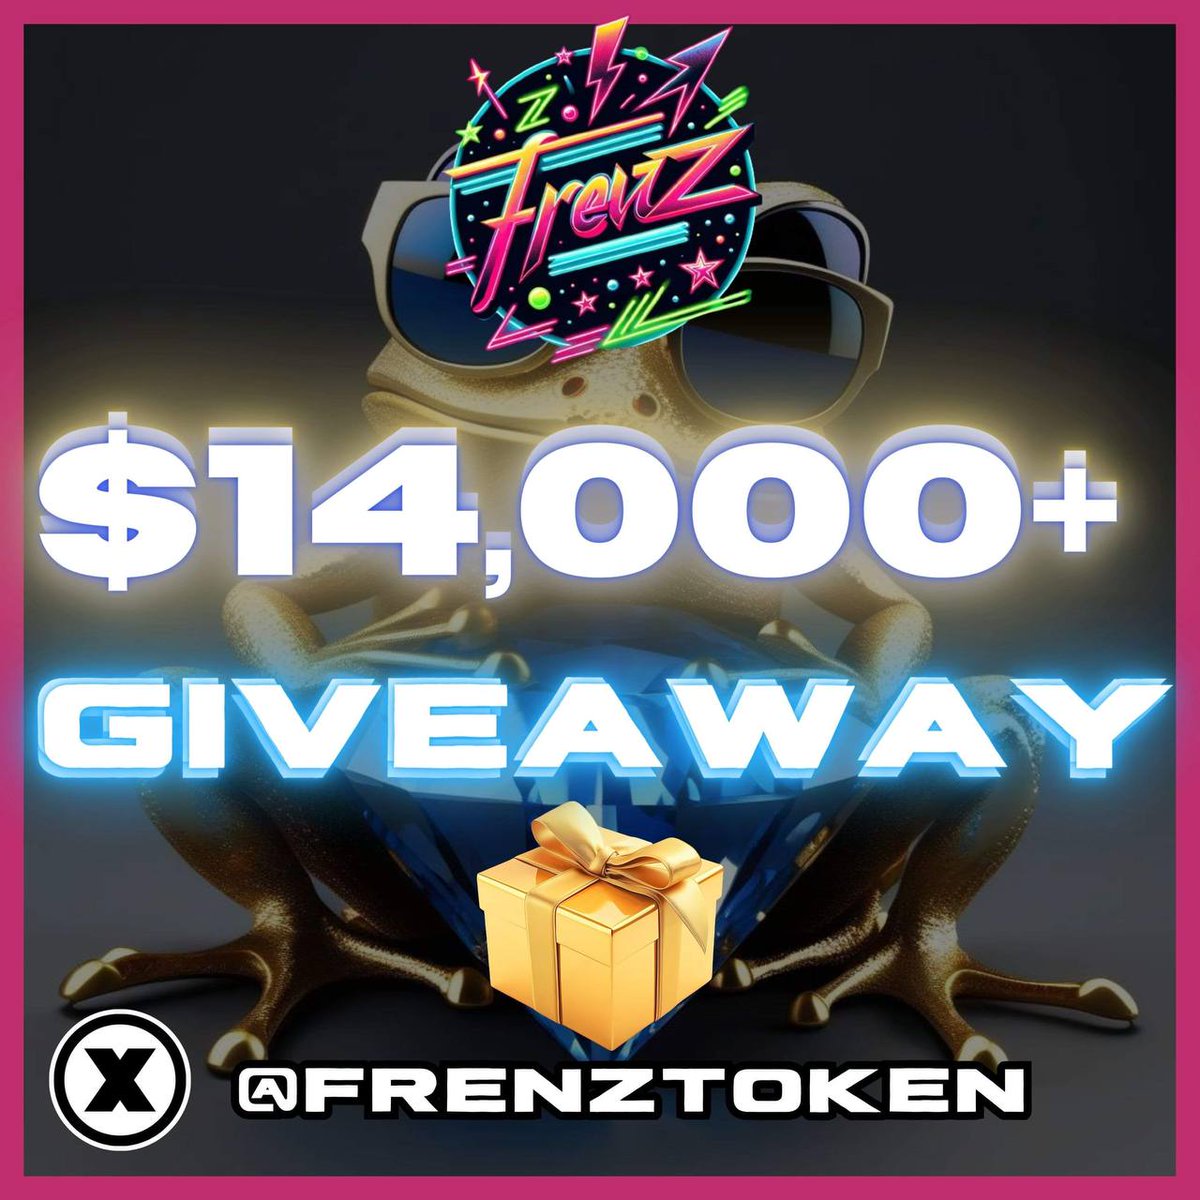 If you haven't checked out #Frenz you need to👀👀👀excellent community and dev team🔥🔥🔥OH ya, they do give aways💰💰💰